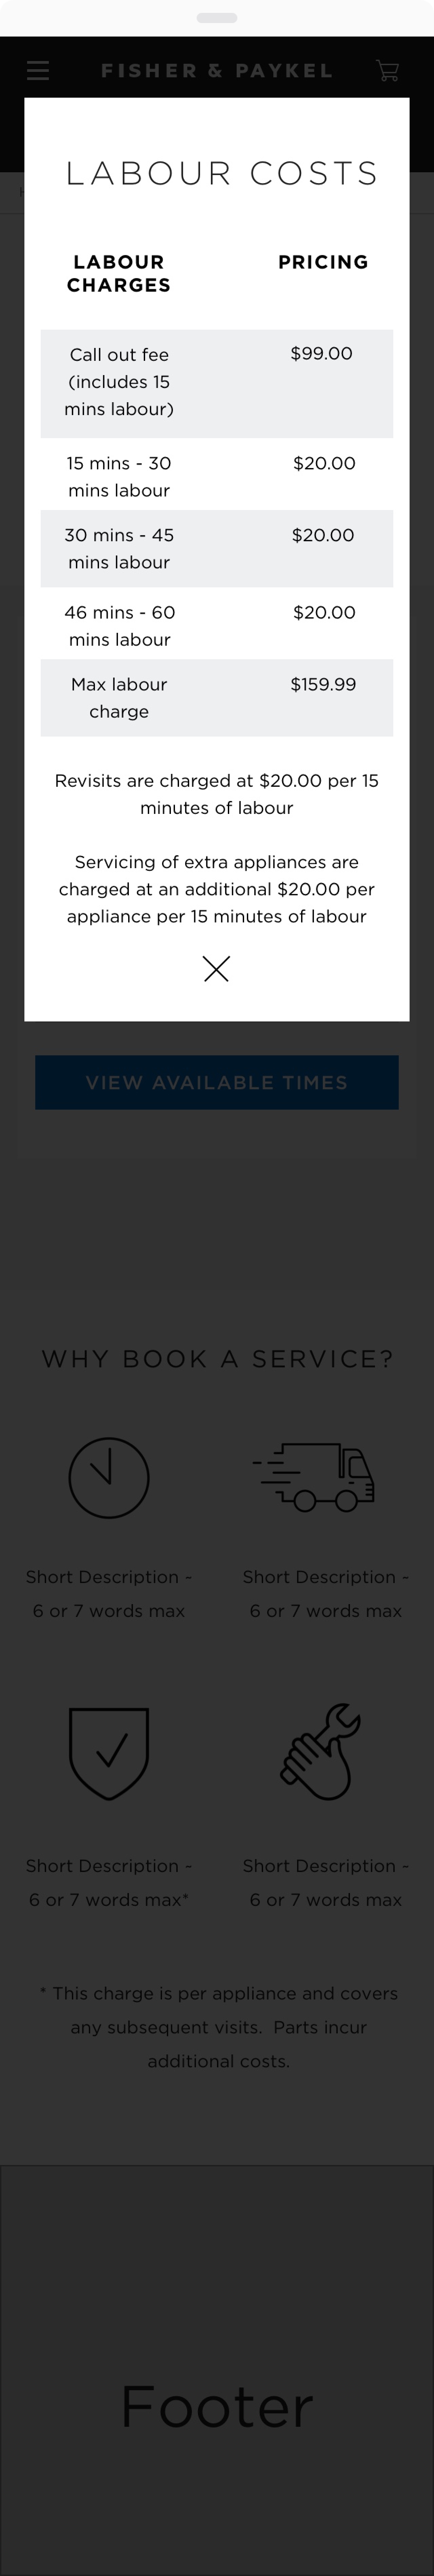 Fisher Paykel service booking design